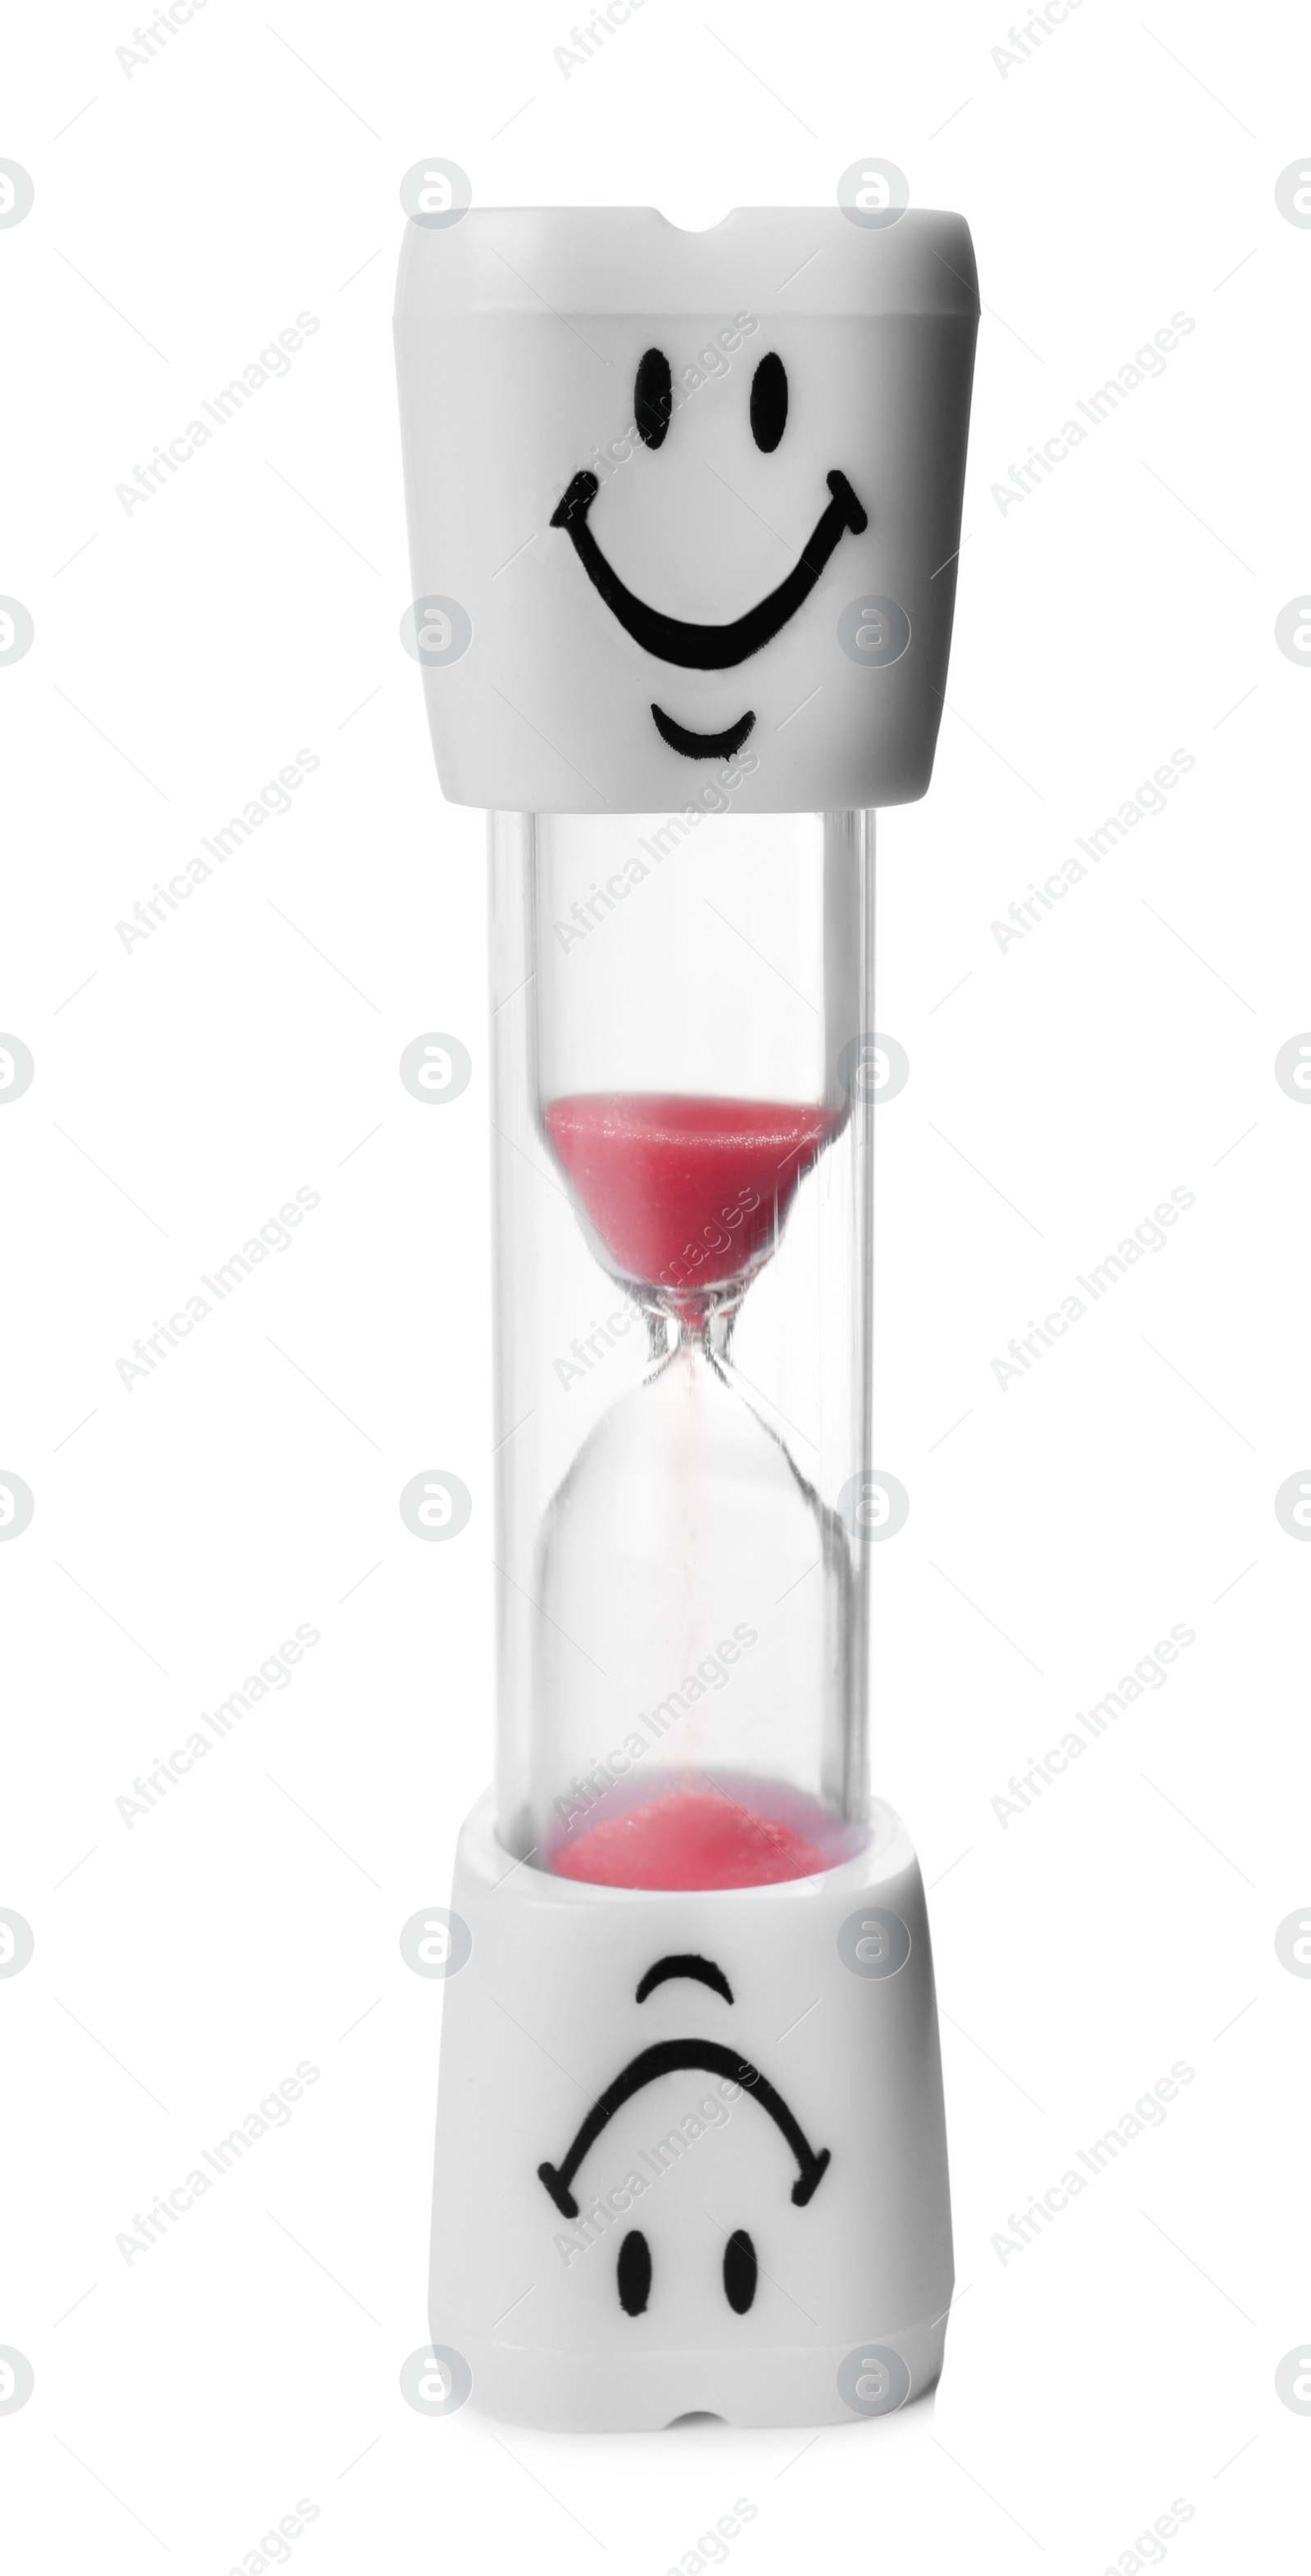 Photo of Hourglass with funny faces on white background. Brushing teeth time